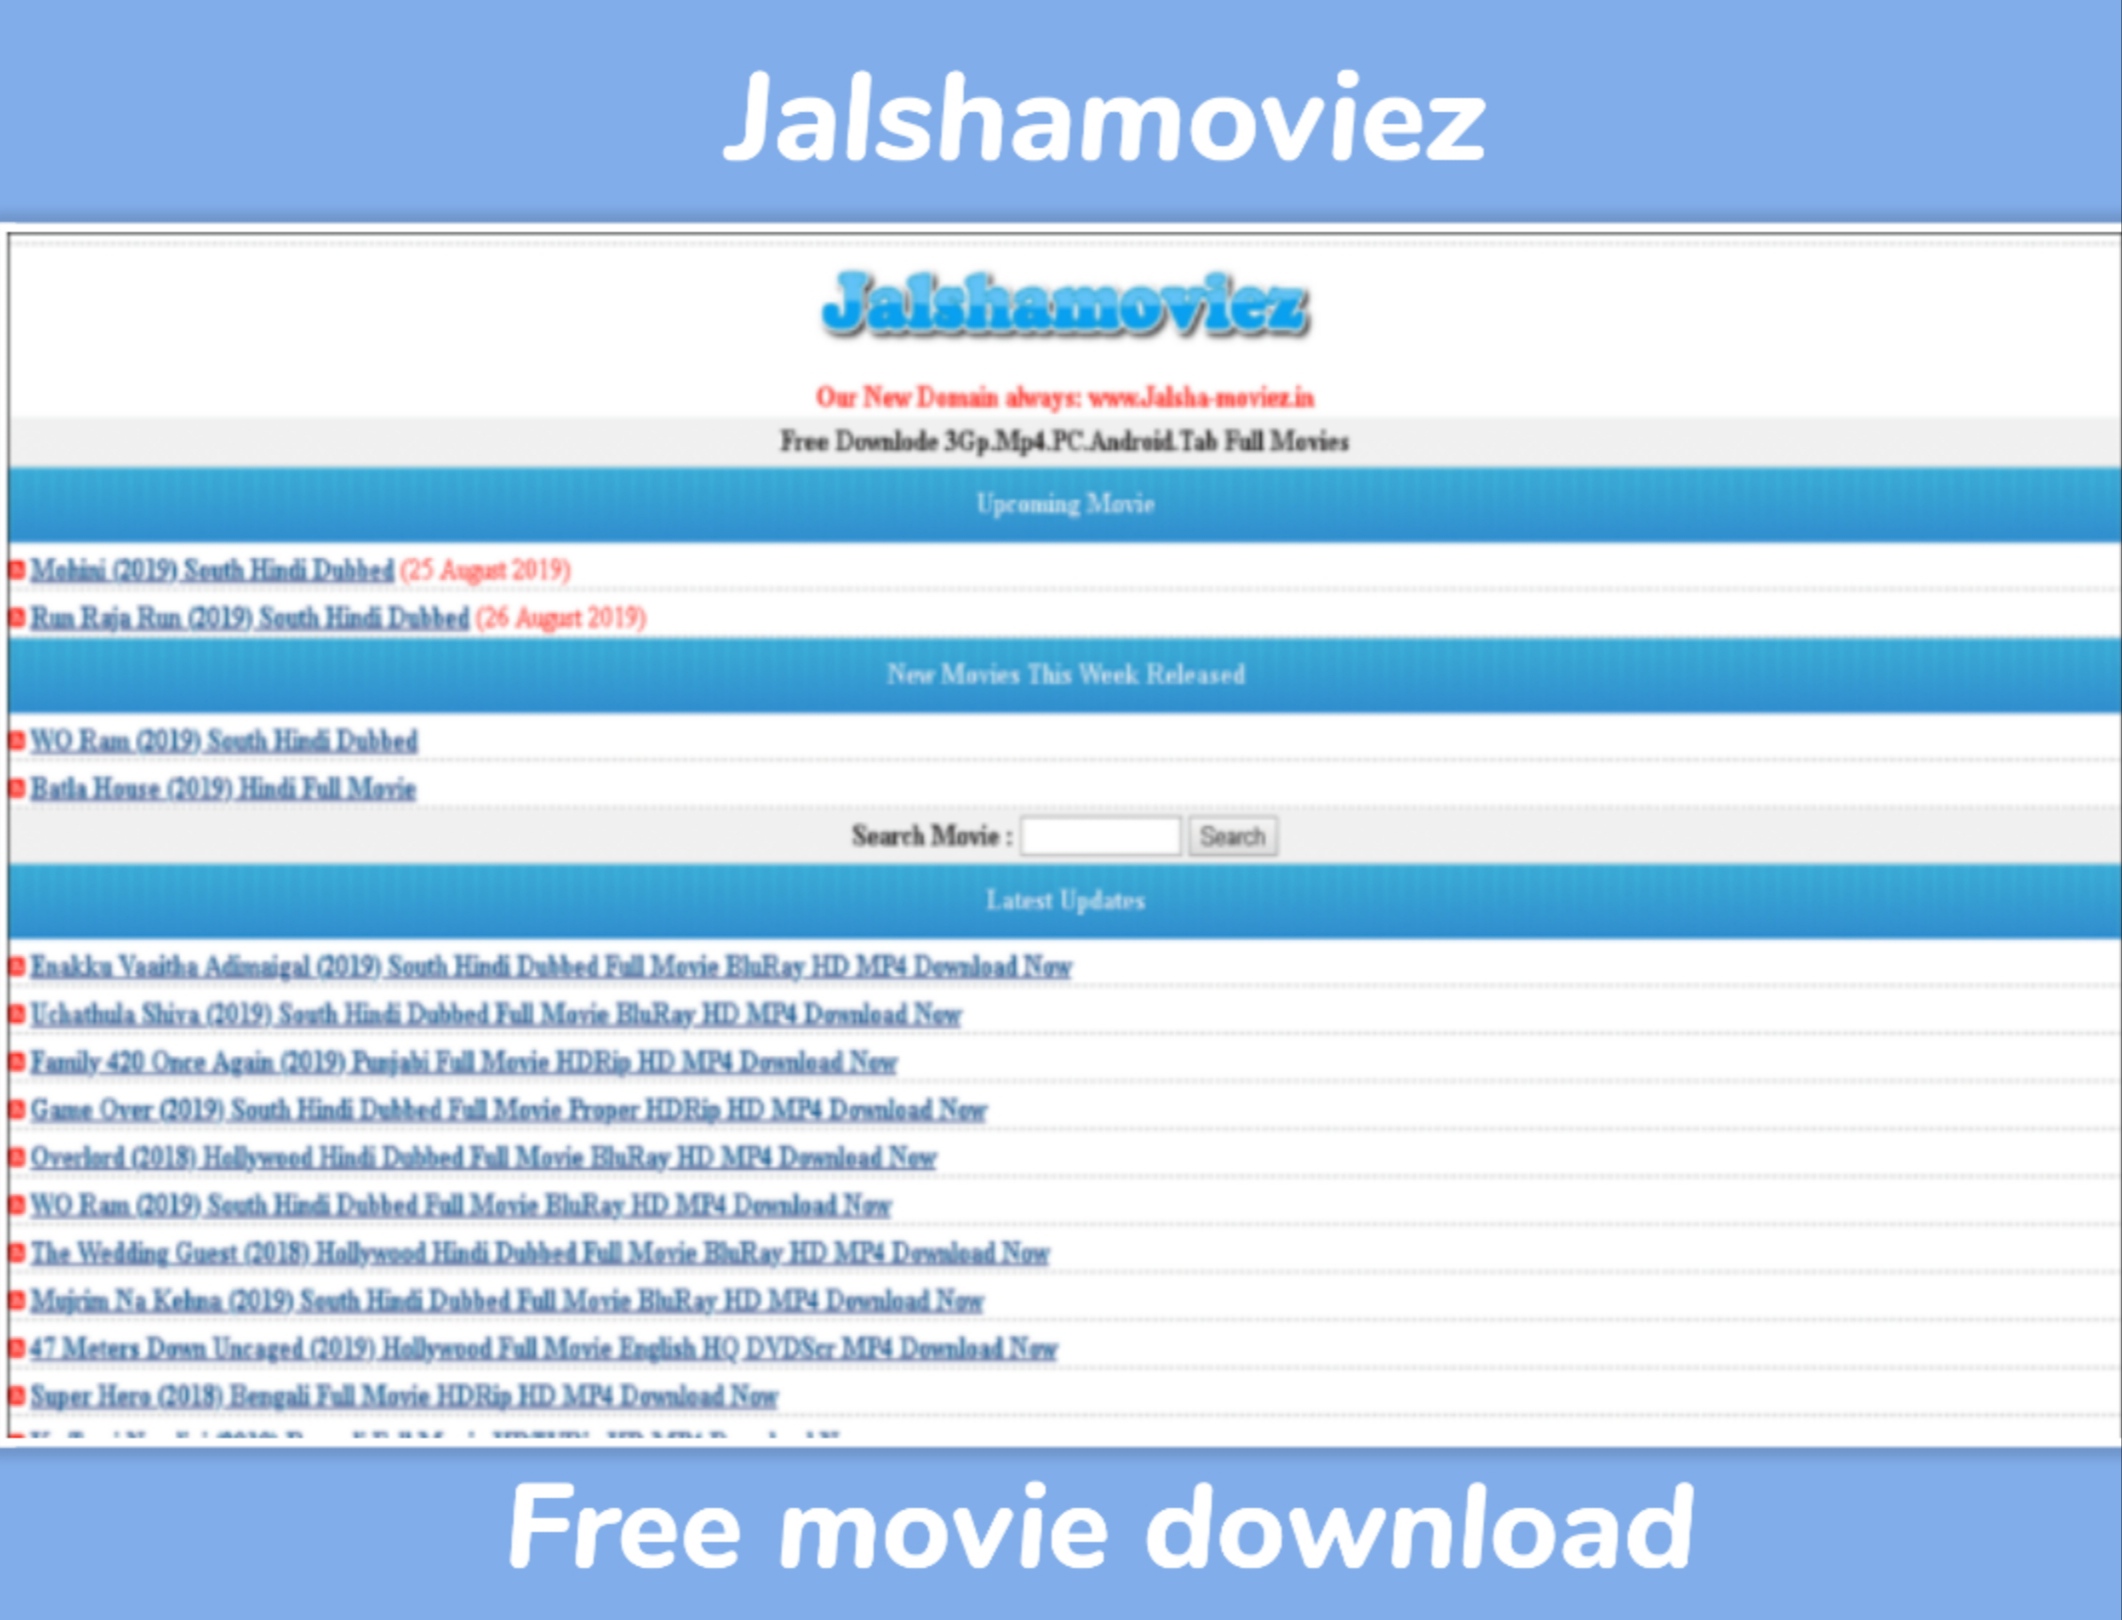 Jalshamoviez Offers Free Movie Download and Streaming